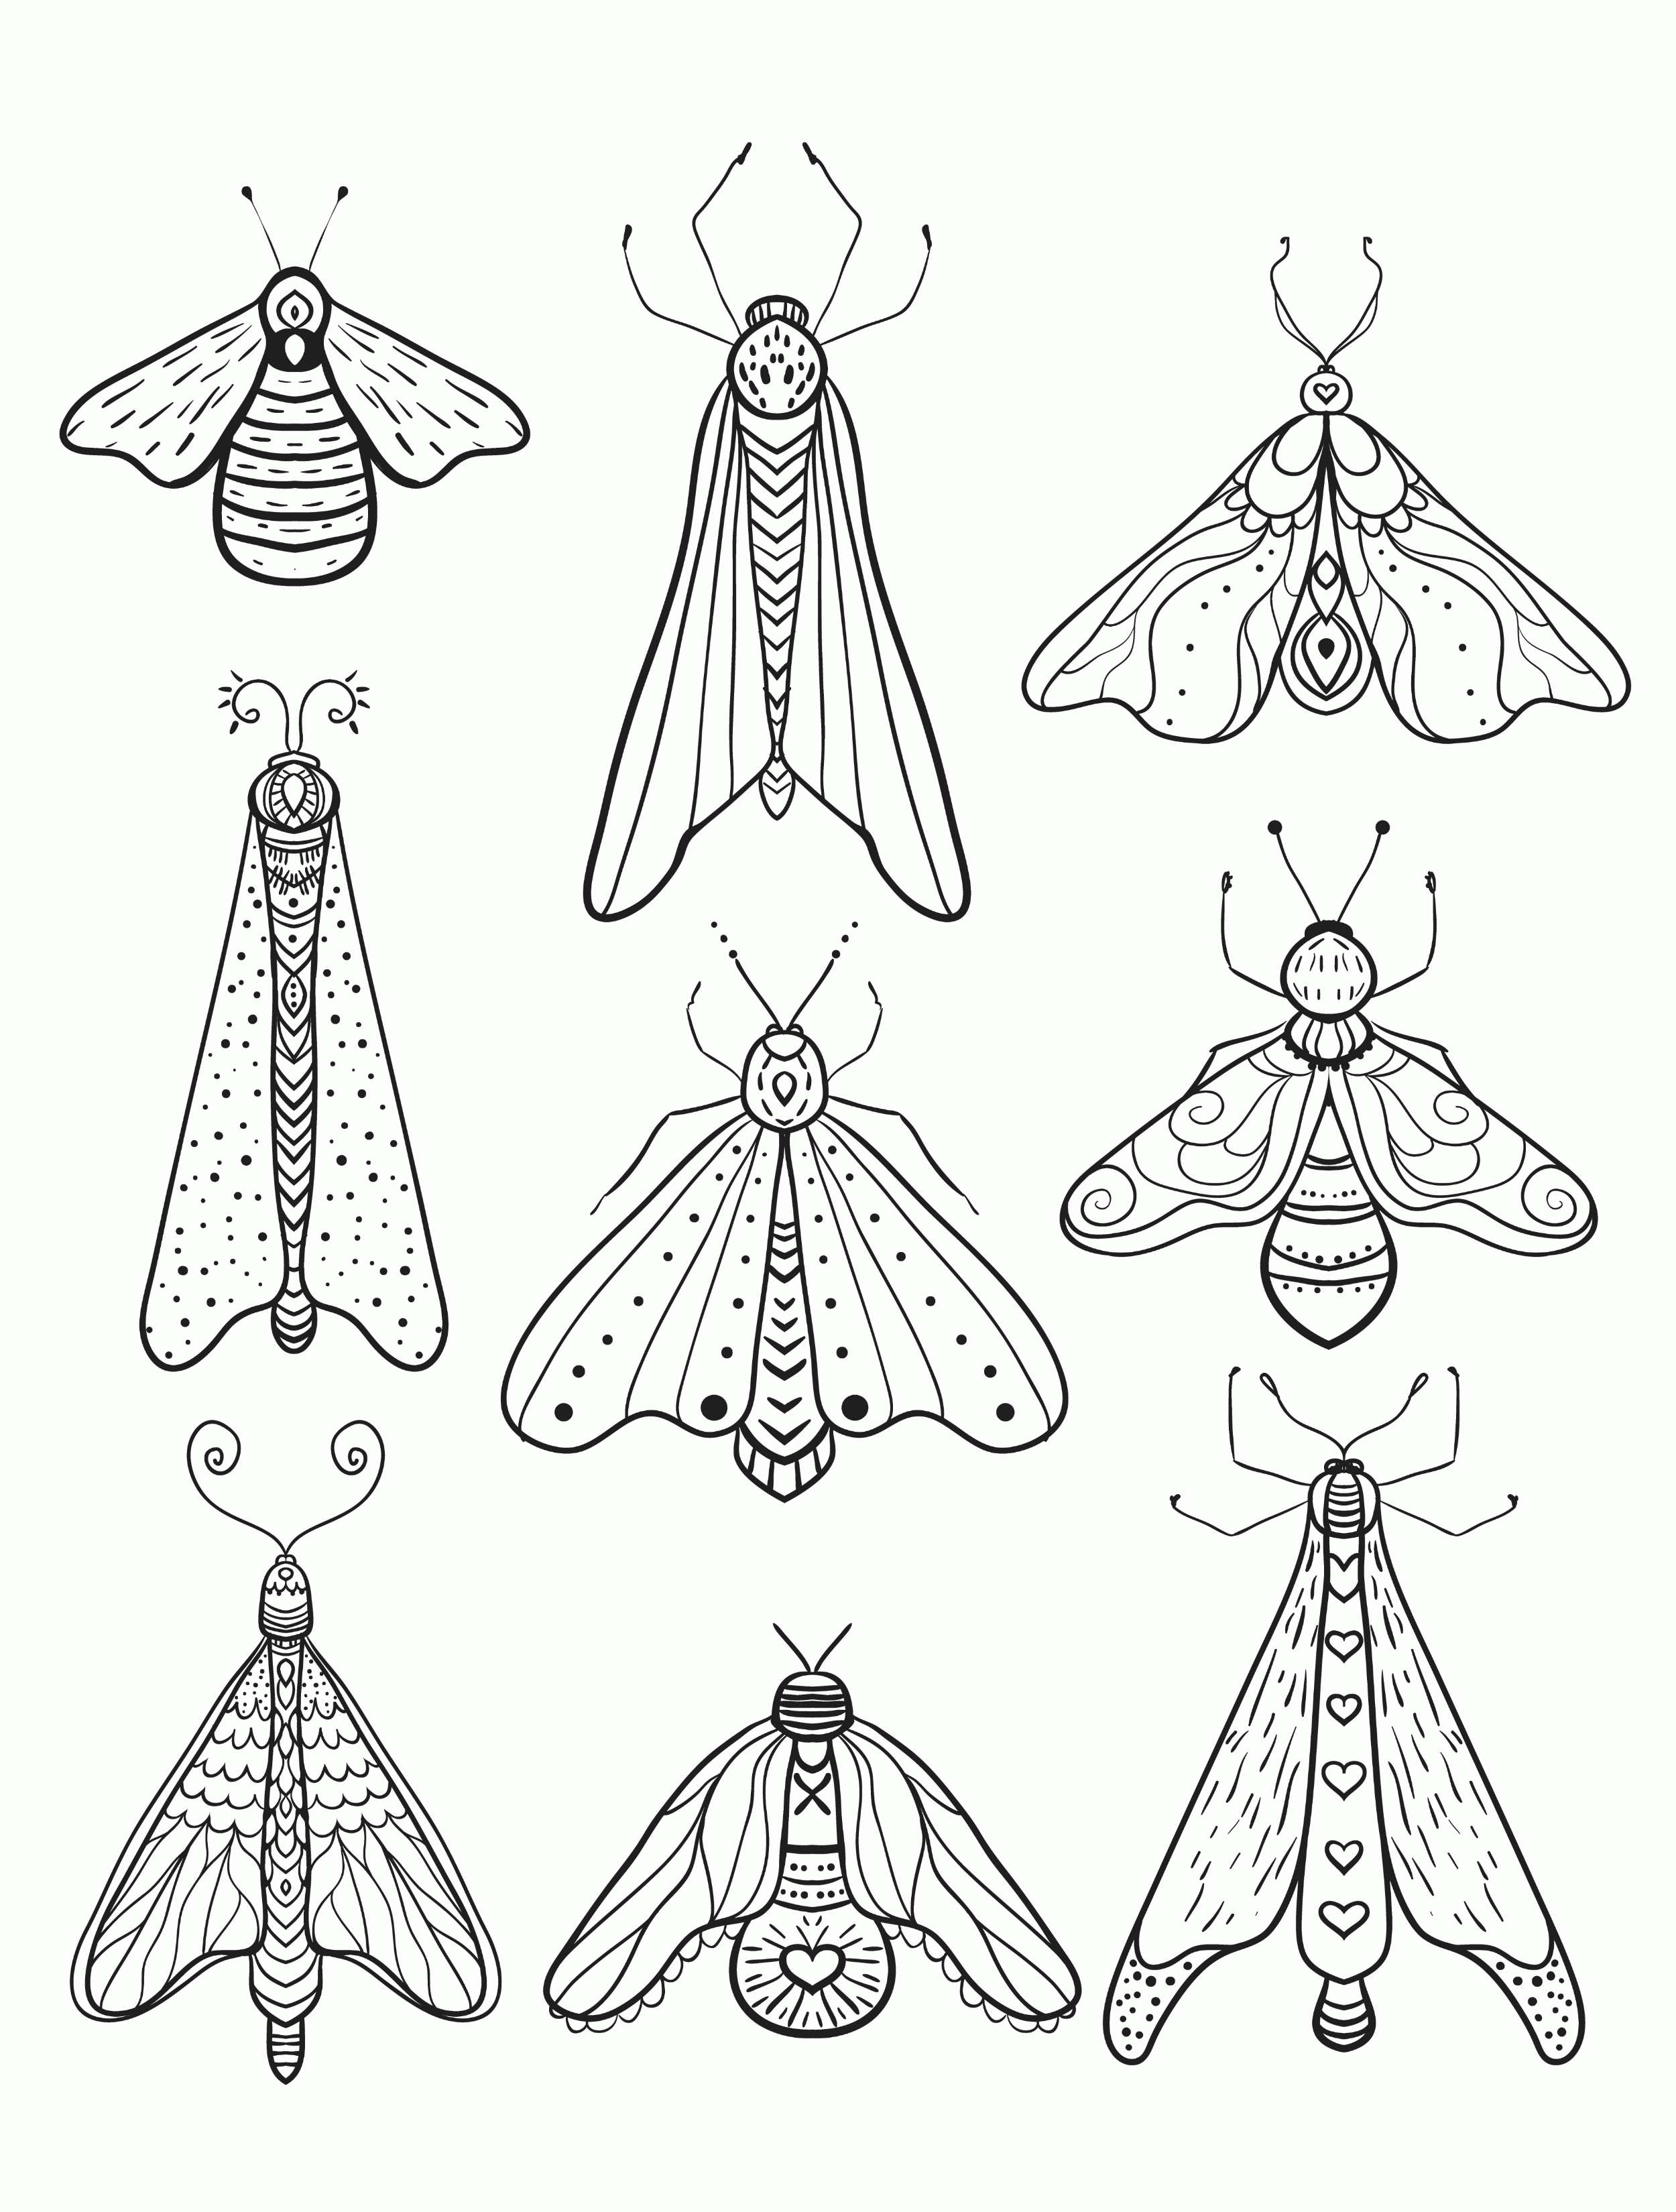 23 Free Printable Insect & Animal Adult Coloring Pages - Page 10 ...